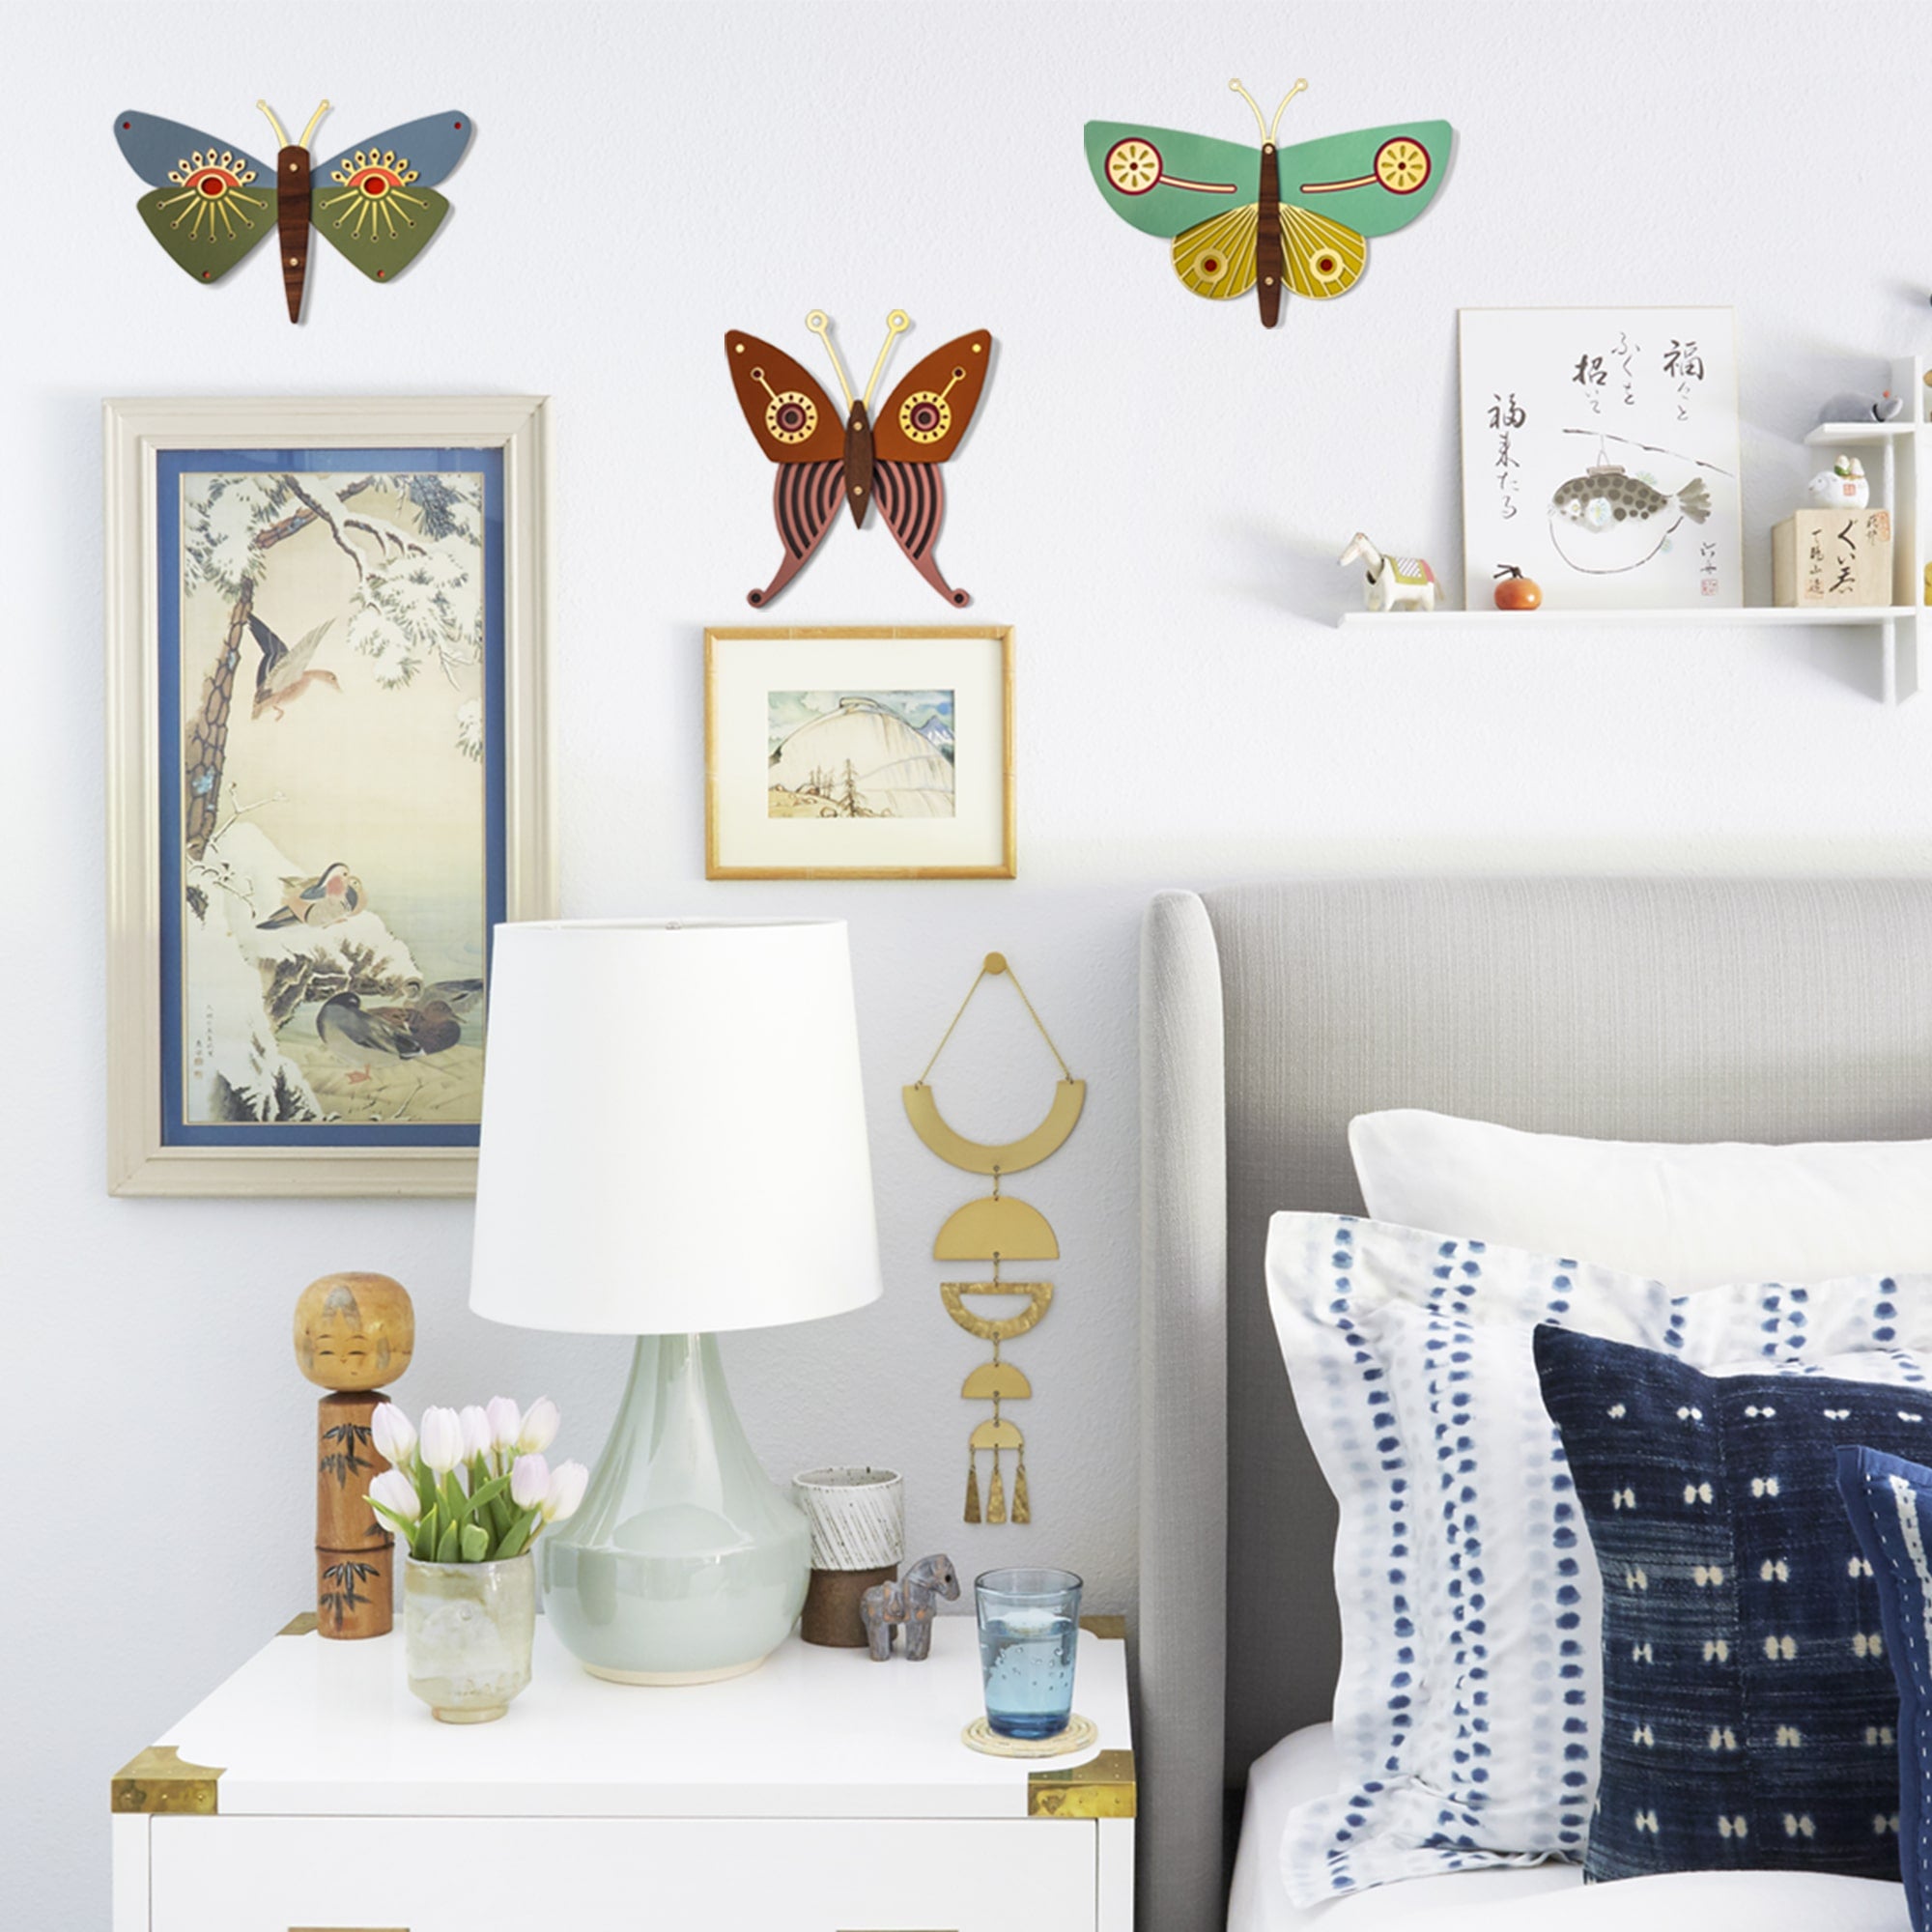 Wooden Butterfly Wall Decor in Japanese Bedroom